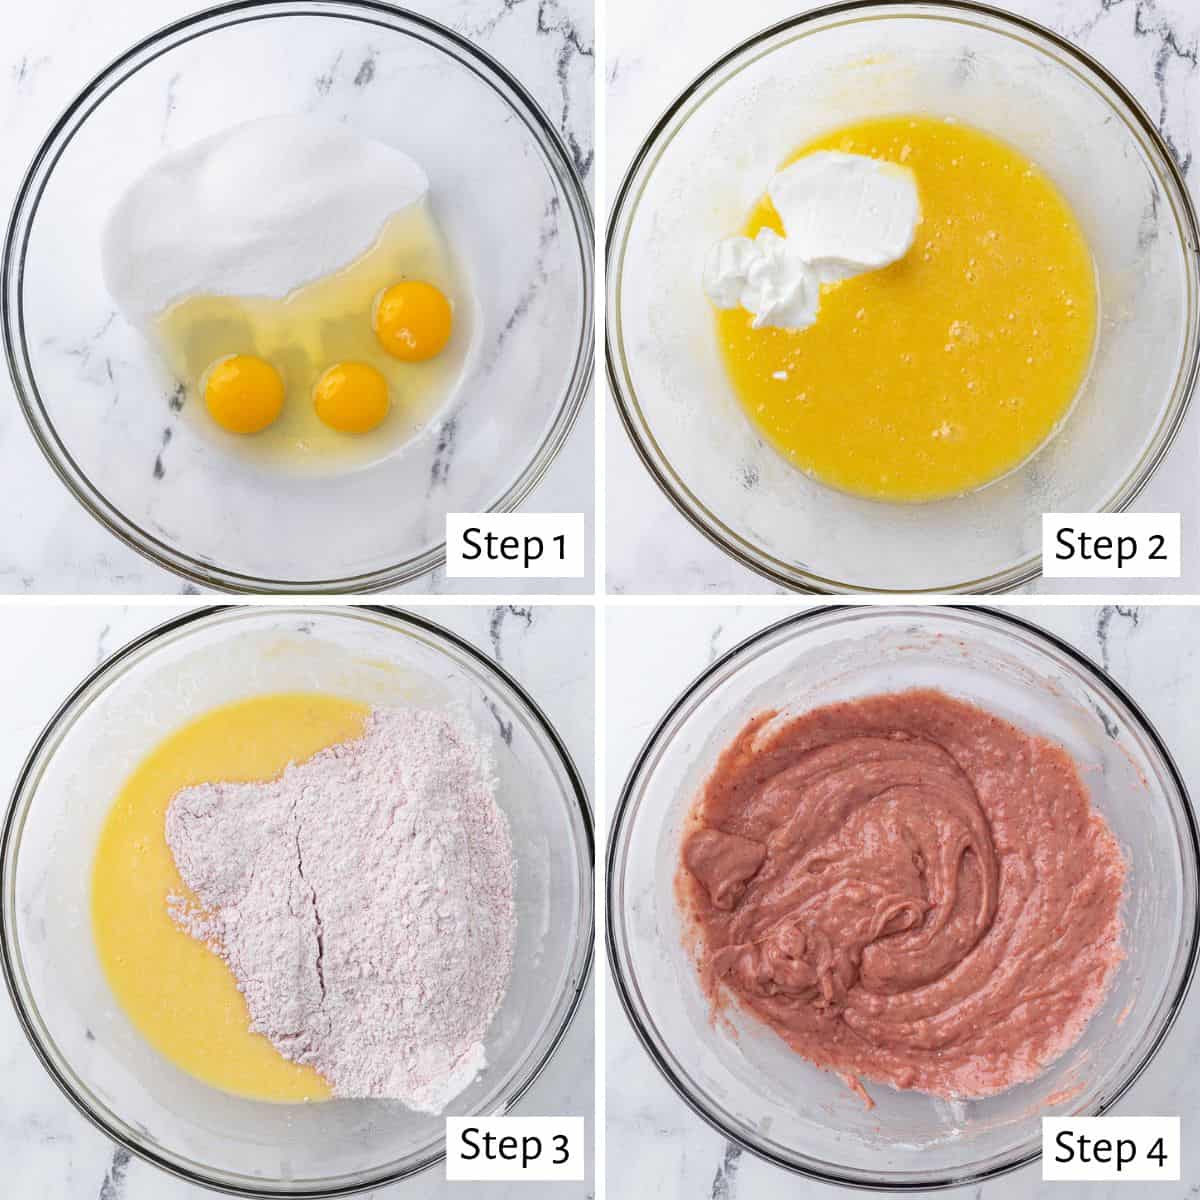 4-image collage of making cupcake batter: 1 - eggs and sugar in a bowl before whisking; 2 - Greek yogurt added before mixing; 3 - dry ingredients added before mixing; 4 - final mixed batter.